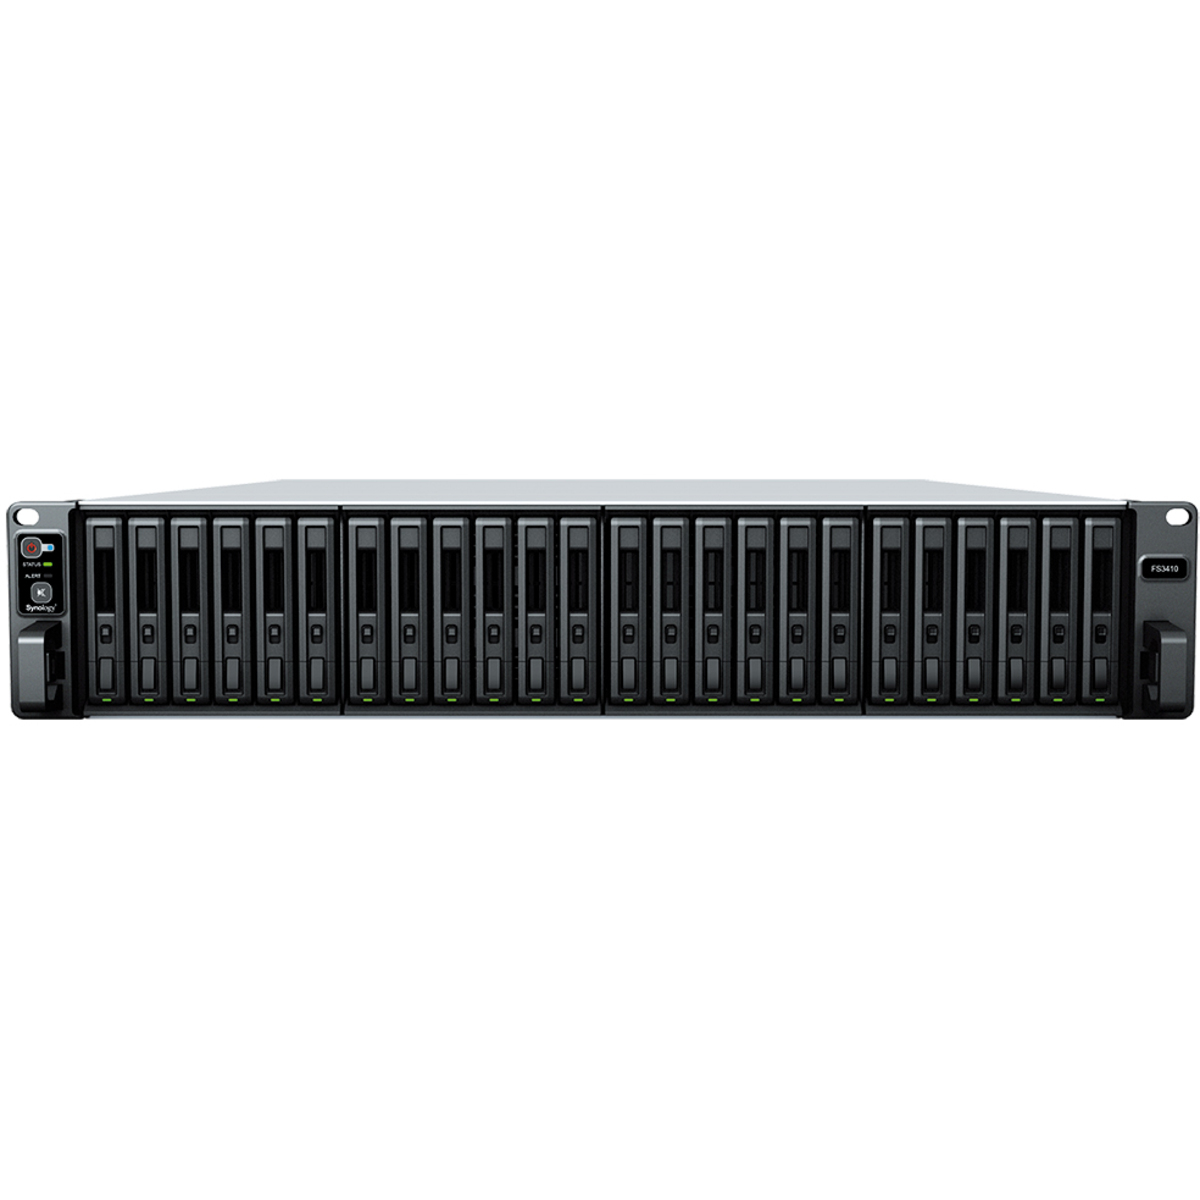 Synology FlashStation FS3410 9tb 24-Bay RackMount Large Business / Enterprise NAS - Network Attached Storage Device 18x500gb Western Digital Red SA500 WDS500G1R0A 2.5 560/530MB/s SATA 6Gb/s SSD NAS Class Drives Installed - Burn-In Tested FlashStation FS3410